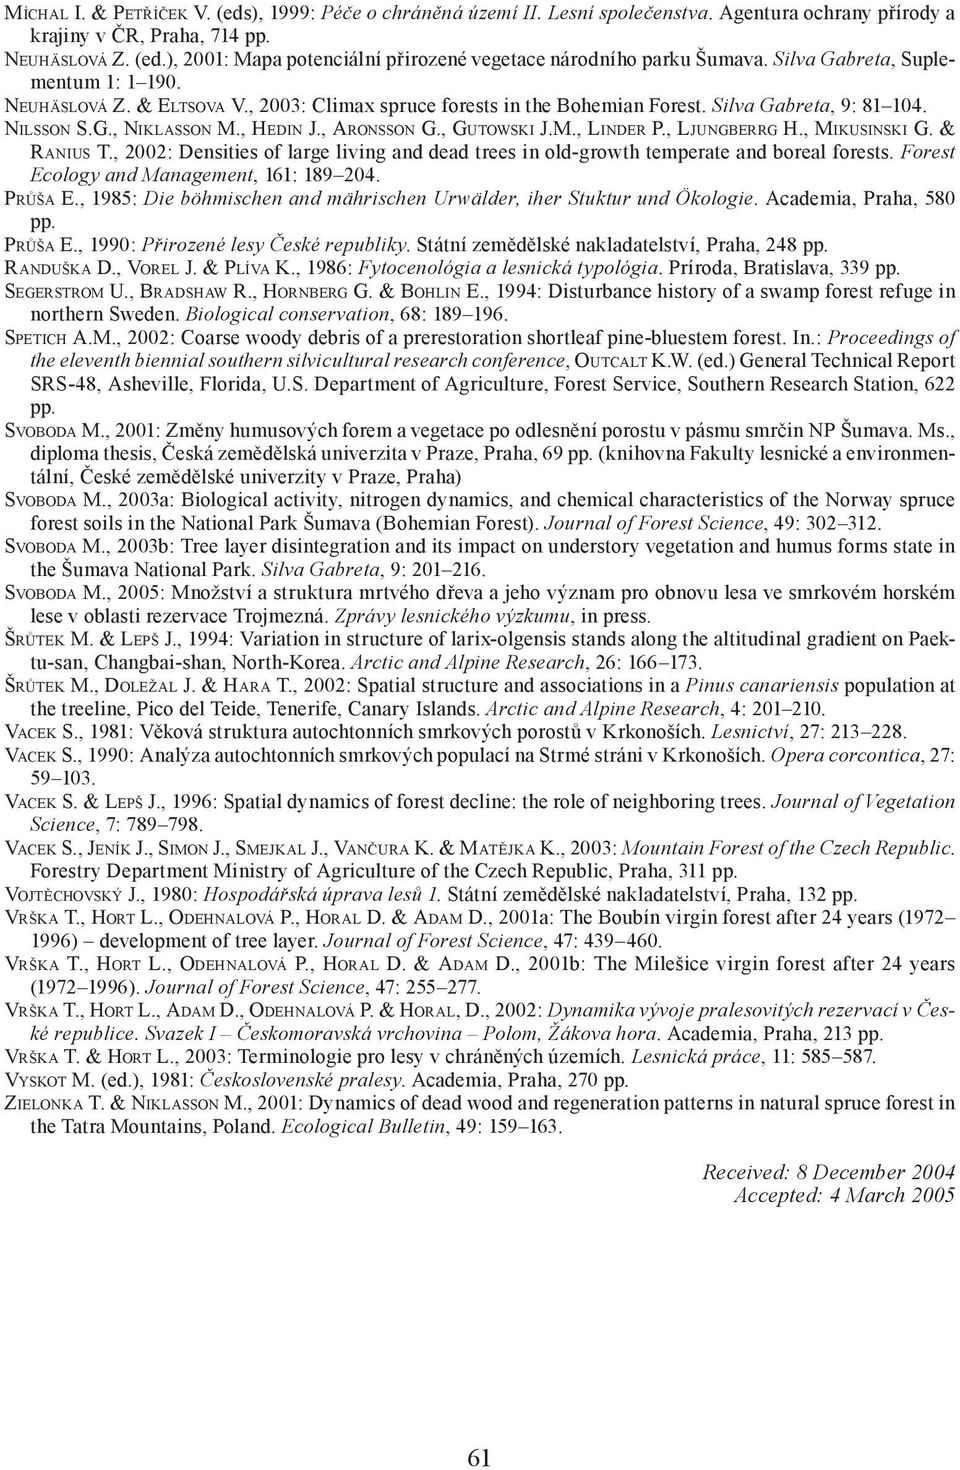 M., LINDER P., LJUNGBERRG H., MIKUSINSKI G. & RANIUS T., 2: Densities of large living and dead trees in old-growth temperate and boreal forests. Forest Ecology and Management, 161: 189 4. PRŮŠA E.